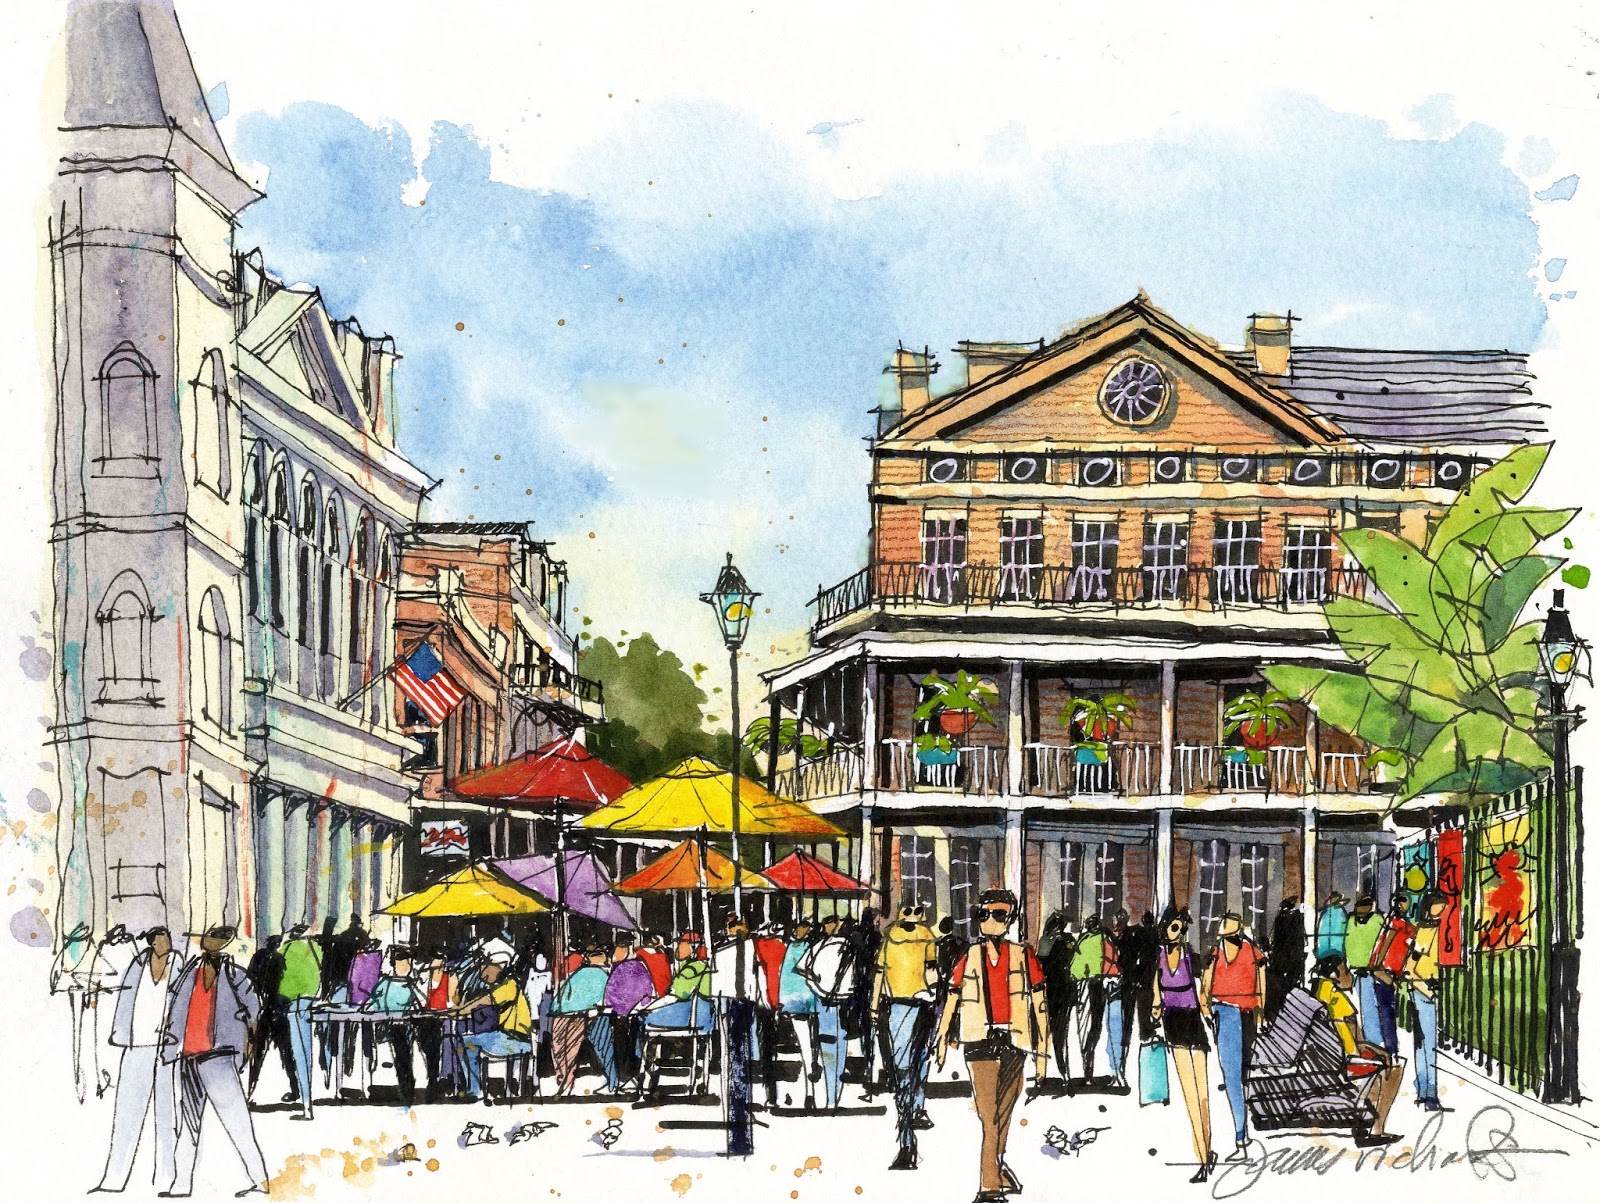 New Orleans Drawing at Explore collection of New